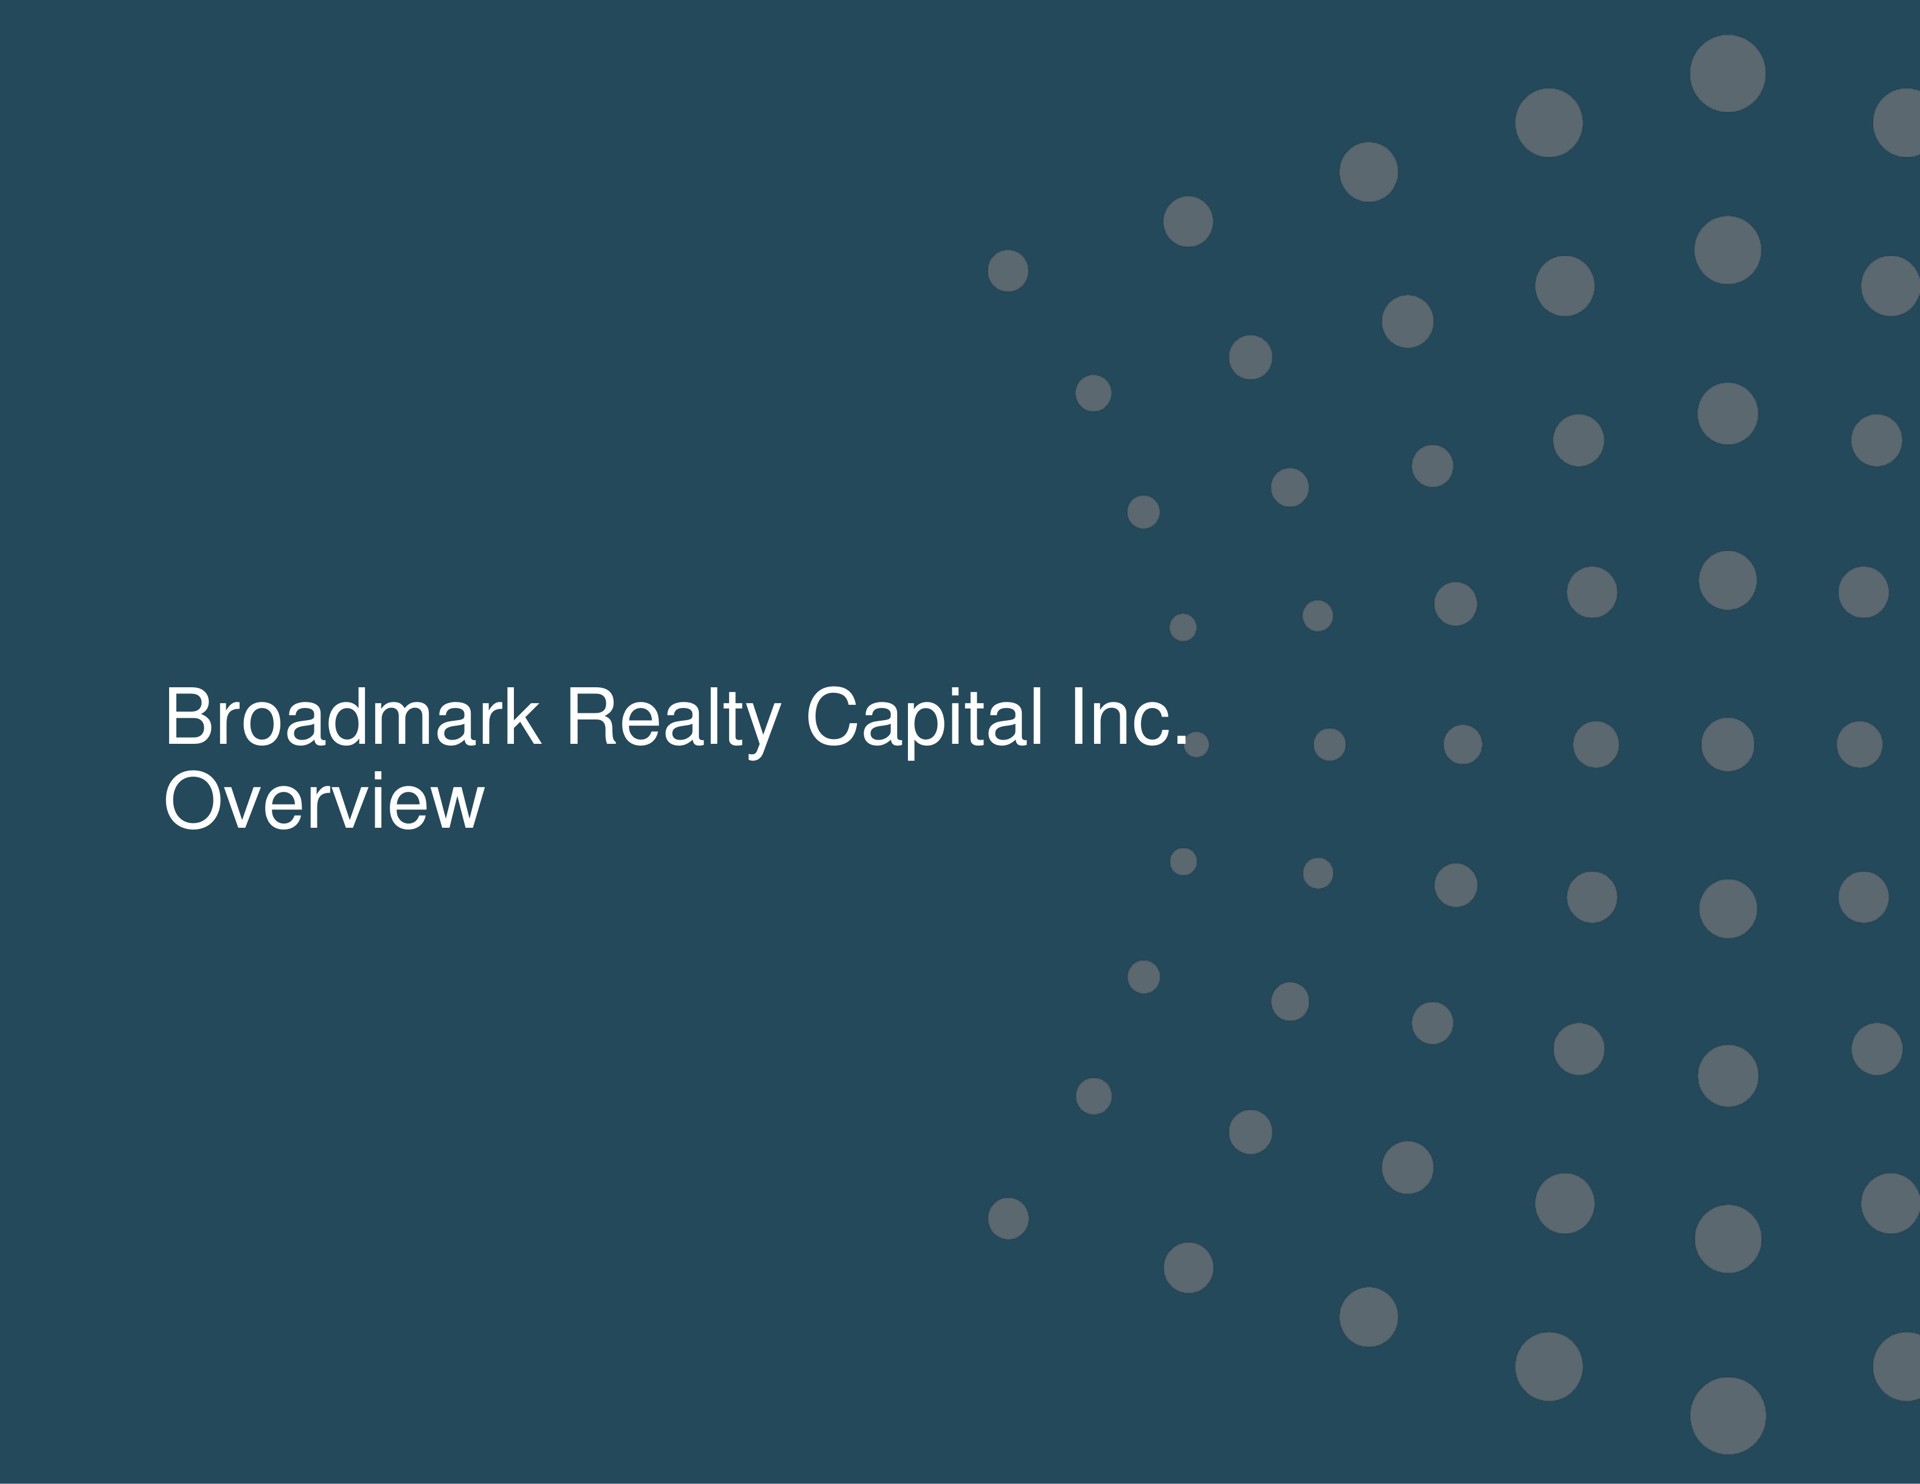 realty capital overview | Ready Capital